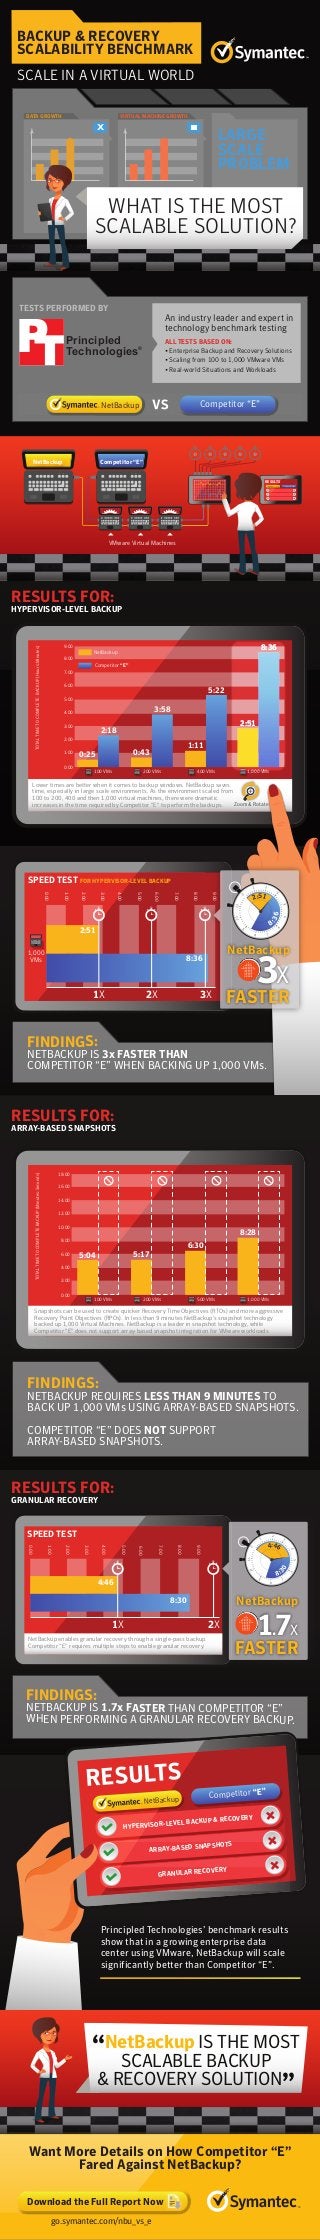 Want More Details on How Competitor “E”
Fared Against NetBackup?
go.symantec.com/nbu_vs_e
Download the Full Report Now
FINDINGS:
NETBACKUP IS 1.7x FASTER THAN COMPETITOR “E”
WHEN PERFORMING A GRANULAR RECOVERY BACKUP.
RESULTS FOR:
GRANULAR RECOVERY
9:00
7:00
8:00
6:00
5:00
4:00
3:00
2:00
1:00
0:00
4:46
8:30
NetBackup enables granular recovery through a single-pass backup.
Competitor “E” requires multiple steps to enable granular recovery.
1X 2X
NetBackup
1.7X
FASTER
0
1
2
3
4
5
7
8
9
10
11
6
4:46
8:3
0
SPEED TEST
Principled Technologies’ benchmark results
show that in a growing enterprise data
center using VMware, NetBackup will scale
significantly better than Competitor “E”.
NetBackup Competitor “E”
RESULTS
HYPERVISOR-LEVEL BACKUP & RECOVERY
ARRAY-BASED SNAPSHOTS
GRANULAR RECOVERY
“NetBackup IS THE MOST
SCALABLE BACKUP
& RECOVERY SOLUTION”
RESULTS FOR:
ARRAY-BASED SNAPSHOTS
16:00
18:00
14:00
12:00
10:00
8:00
6:00
4:00
2:00
0:00
5:04 5:17
6:30
8:28
100 VMs 200 VMs 500 VMs 1,000 VMs
TOTALTIMETOCOMPLETEBACKUP(Minutes:Seconds)
Snapshots can be used to create quicker Recovery Time Objectives (RTOs) and more aggressive
Recovery Point Objectives (RPOs). In less than 9 minutes NetBackup’s snapshot technology
backed up 1,000 Virtual Machines. NetBackup is a leader in snapshot technology, while
Competitor "E" does not support array-based snapshot integration for VMware workloads.
FINDINGS:
NETBACKUP REQUIRES LESS THAN 9 MINUTES TO
BACK UP 1,000 VMs USING ARRAY-BASED SNAPSHOTS.
COMPETITOR “E” DOES NOT SUPPORT
ARRAY-BASED SNAPSHOTS.
FINDINGS:
NETBACKUP IS 3x FASTER THAN
COMPETITOR “E” WHEN BACKING UP 1,000 VMs.
SPEED
RESULTS FOR:
HYPERVISOR-LEVEL BACKUP
8:00
9:00
7:00
6:00
5:00
4:00
3:00
2:00
1:00
0:00
0:25
2:18
0:43
1:11
2:51
3:58
8:36
NetBackup
Competitor “E”
5:22
100 VMs 200 VMs 400 VMs 1,000 VMs
Lower times are better when it comes to backup windows. NetBackup saves
time, especially in large scale environments. As the environment scaled from
100 to 200, 400 and then 1,000 virtual machines, there were dramatic
increases in the time required by Competitor "E" to perform the backups.
TOTALTIMETOCOMPLETEBACKUP(Hours:Minutes)
Zoom & Rotate
9:00
7:00
8:00
6:00
5:00
4:00
3:00
2:00
1:00
0:00
1,000
VMs
2:51
8:36
1X 2X 3X
0
1 2
3
45
78
9
1011
6
2:51
8
:36
NetBackup
3X
FASTER
FOR HYPERVISOR-LEVEL BACKUPSPEED TEST
NetBackup Competitor “E”
RESULTS
VMware Virtual Machines
Competitor “E”NetBackup
VIRTUAL MACHINE GROWTH
=
DATA GROWTH
X
LARGE
SCALE
PROBLEM
TESTS PERFORMED BY
An industry leader and expert in
technology benchmark testing
ALL TESTS BASED ON:
• Enterprise Backup and Recovery Solutions
• Scaling from 100 to 1,000 VMware VMs
• Real-world Situations and Workloads
WHAT IS THE MOST
SCALABLE SOLUTION?
NetBackup Competitor “E”
Principled
®
Technologies
BACKUP & RECOVERY
SCALABILITY BENCHMARK
SCALE IN A VIRTUAL WORLD
 